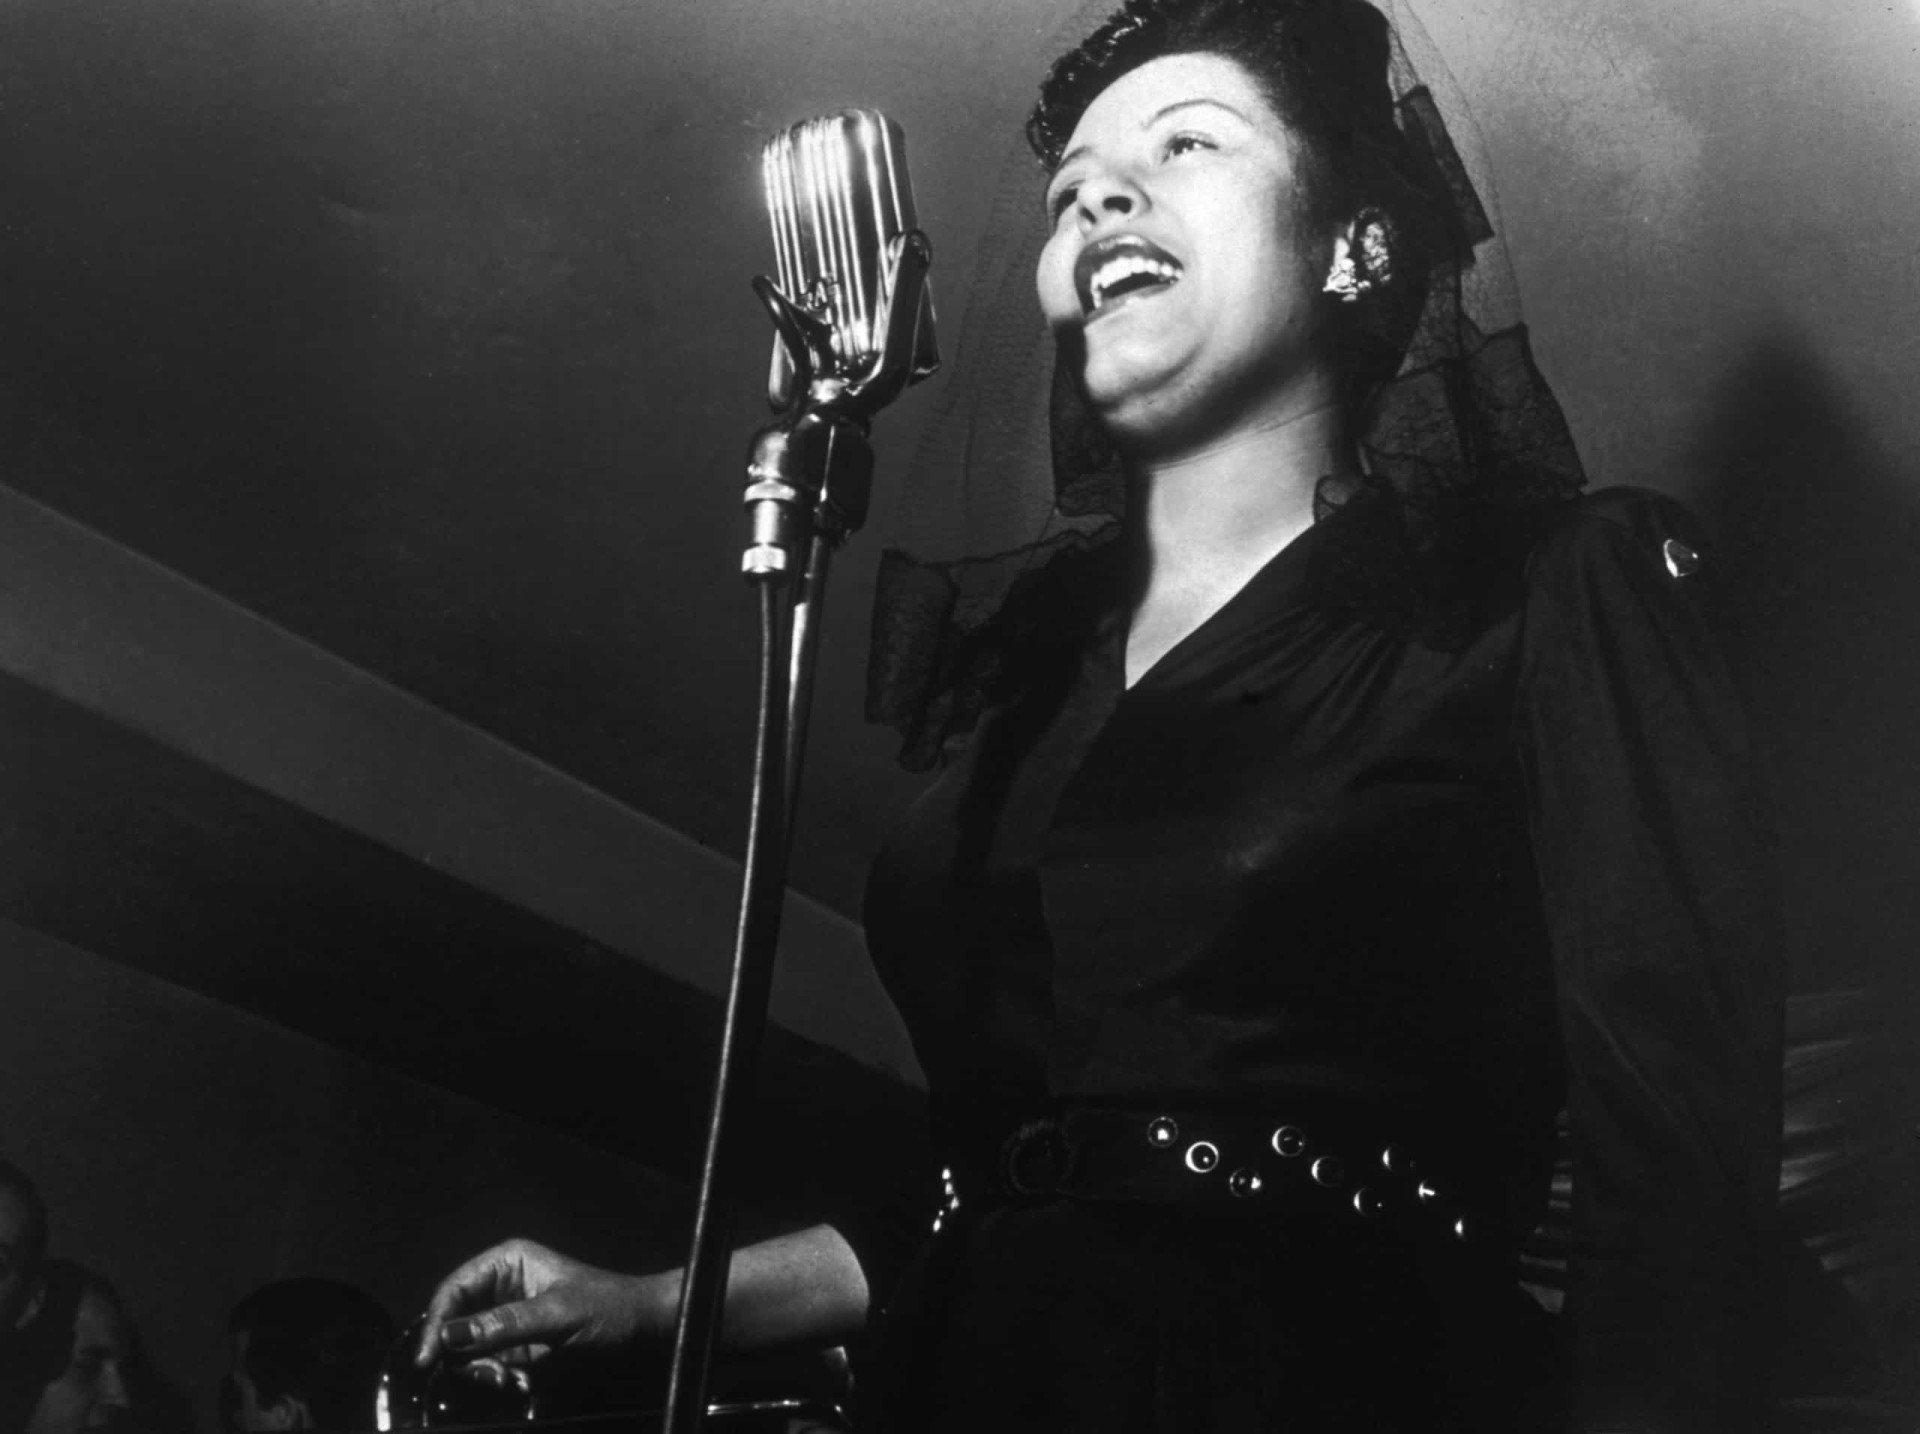 <p>A true heroine of Harlem, Billie Holiday was at one time the most popular performer in New York, and left behind a legacy that endures to this day. While her life was checkered with drug abuse and run-ins with the law, Holiday's mark on music and culture will never be forgotten.</p><p>You may also like:<a href="https://www.starsinsider.com/n/309193?utm_source=msn.com&utm_medium=display&utm_campaign=referral_description&utm_content=507986v1en-sg"> The different ways we worship </a></p>